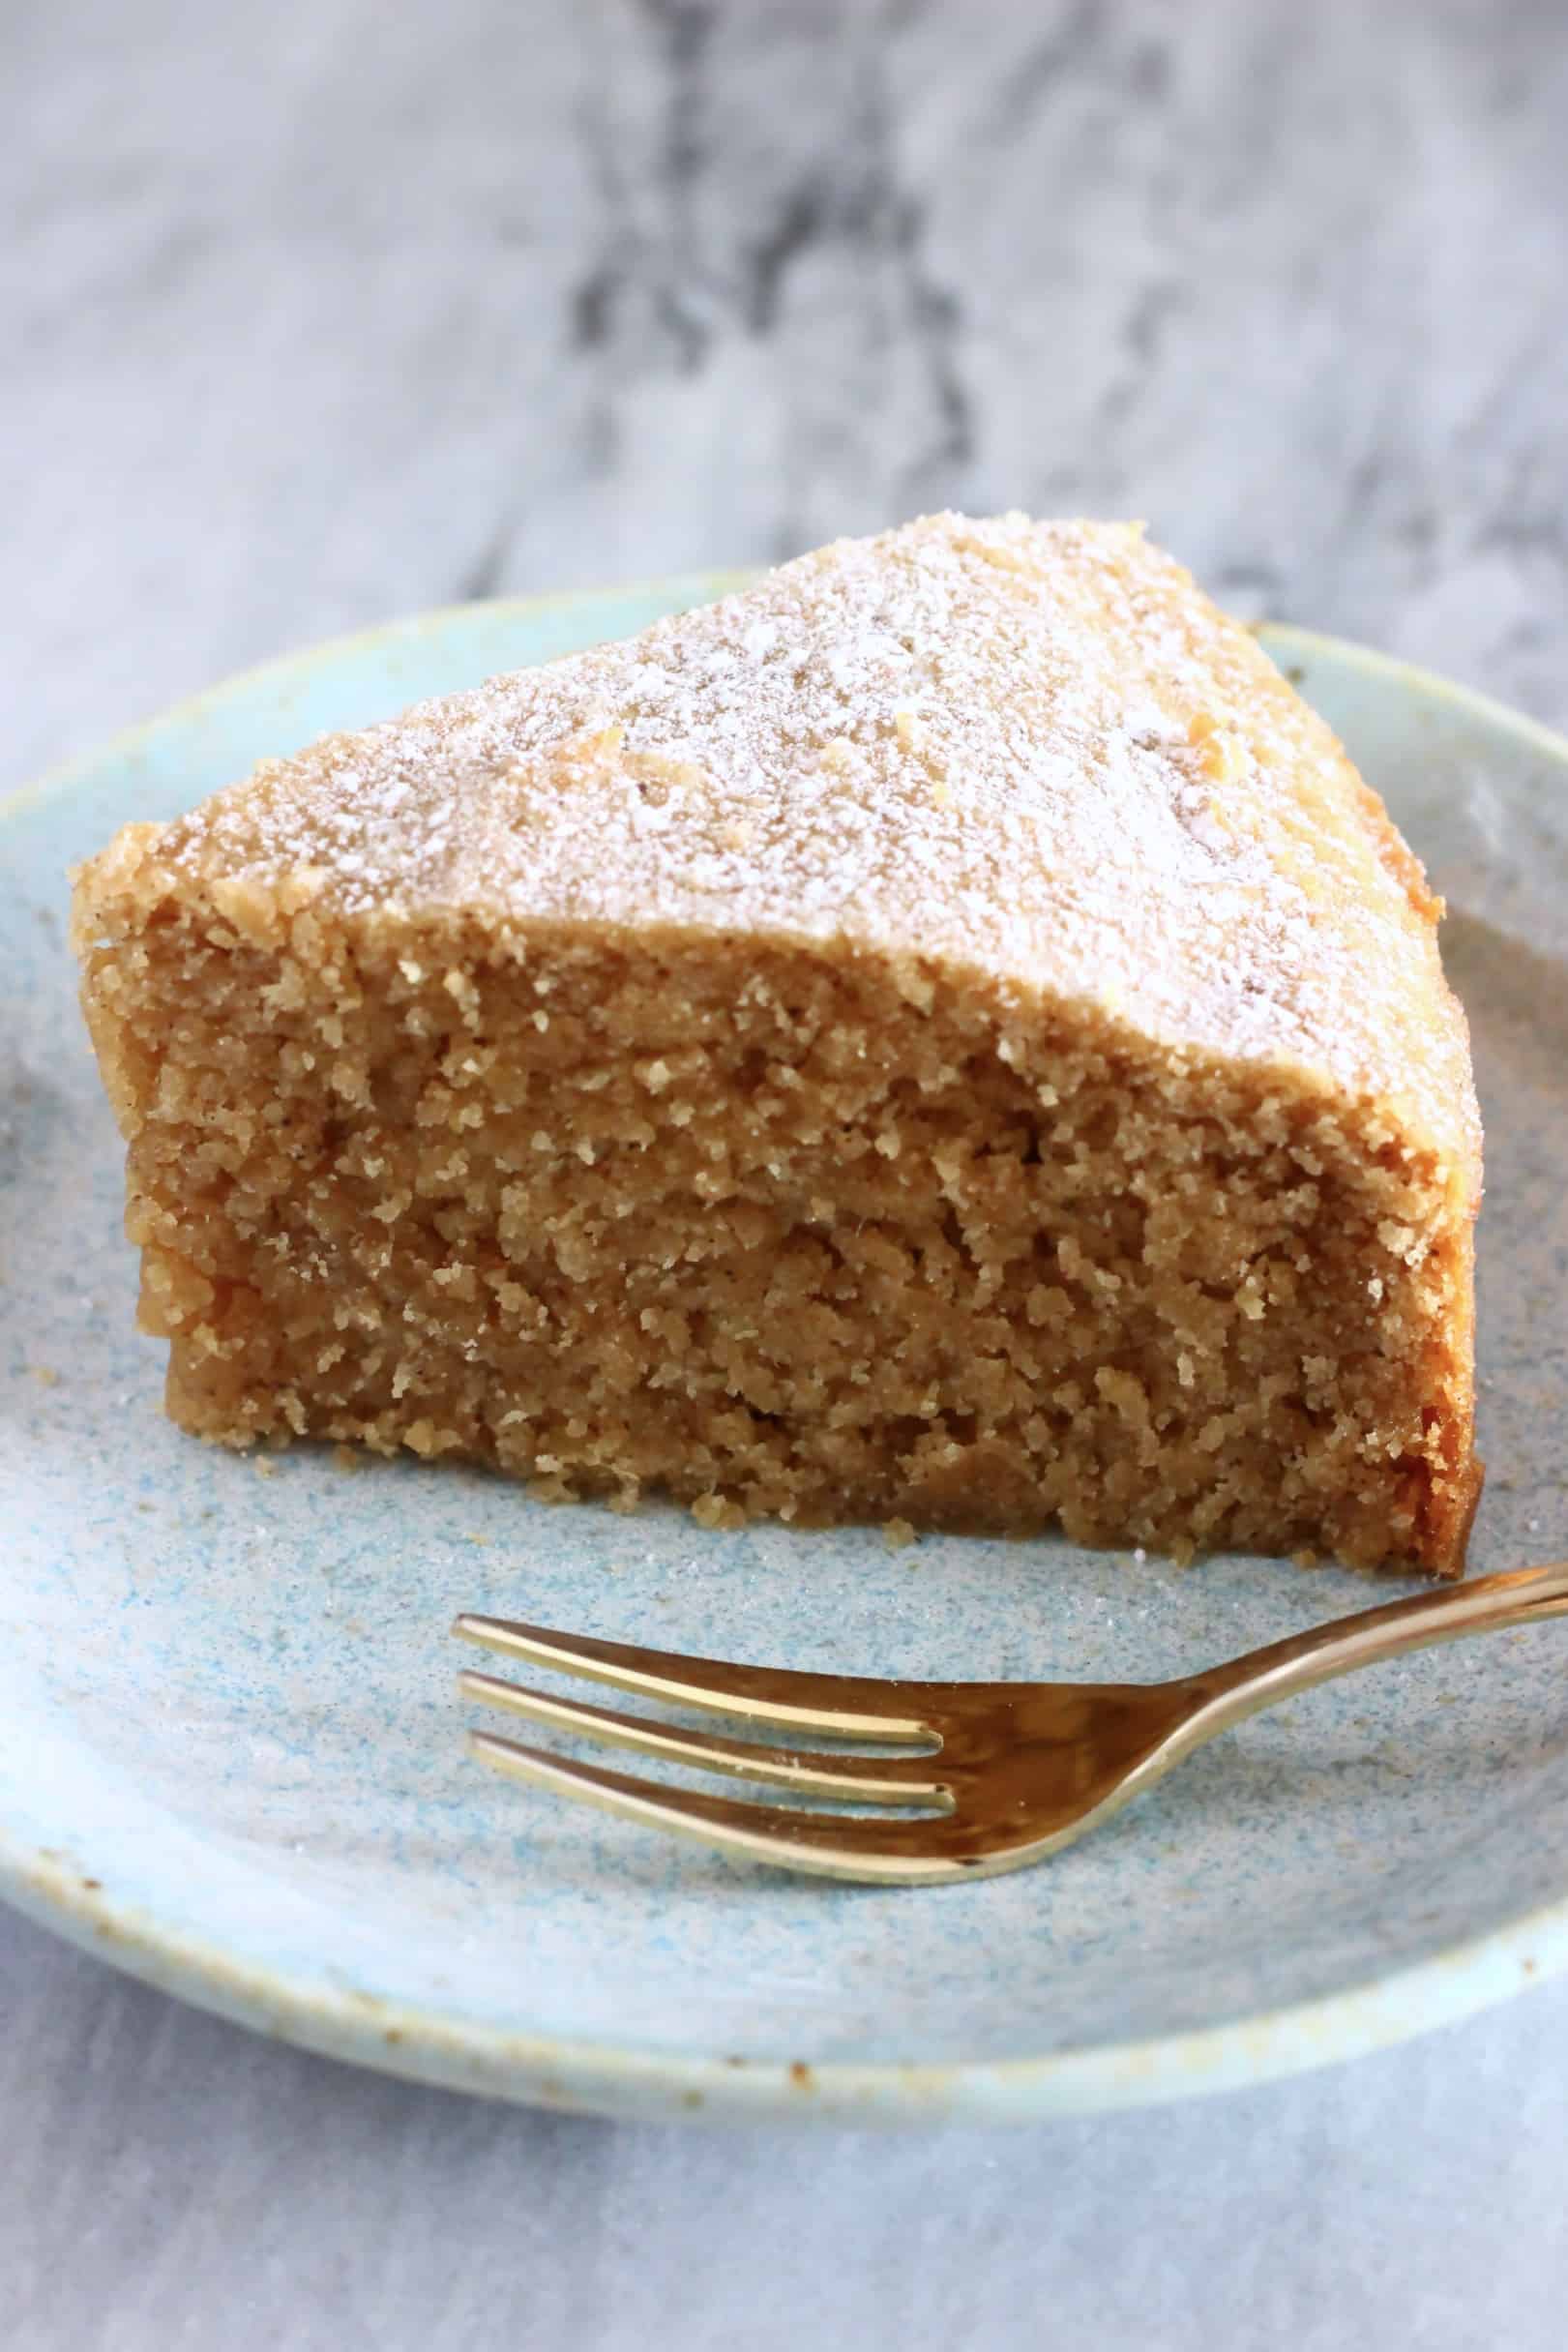 A slice of gluten-free vegan ginger cake on a plate with a gold fork